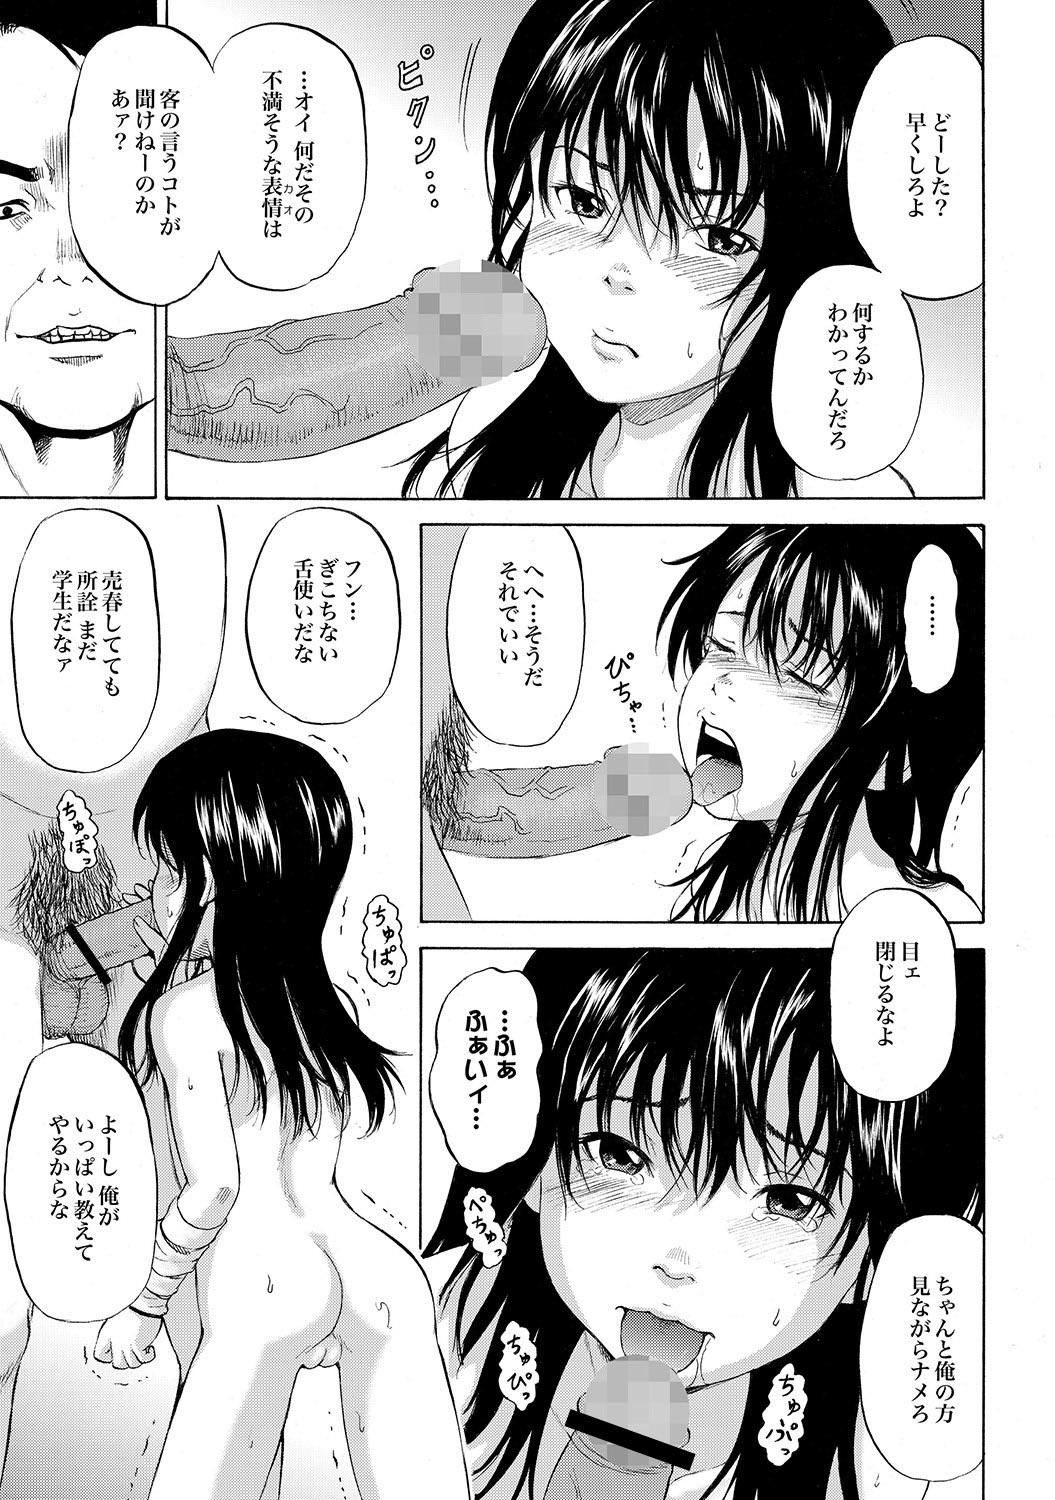 Doublepenetration 家出少女ユイカ第一話 ●い娼婦たち Body - Page 6